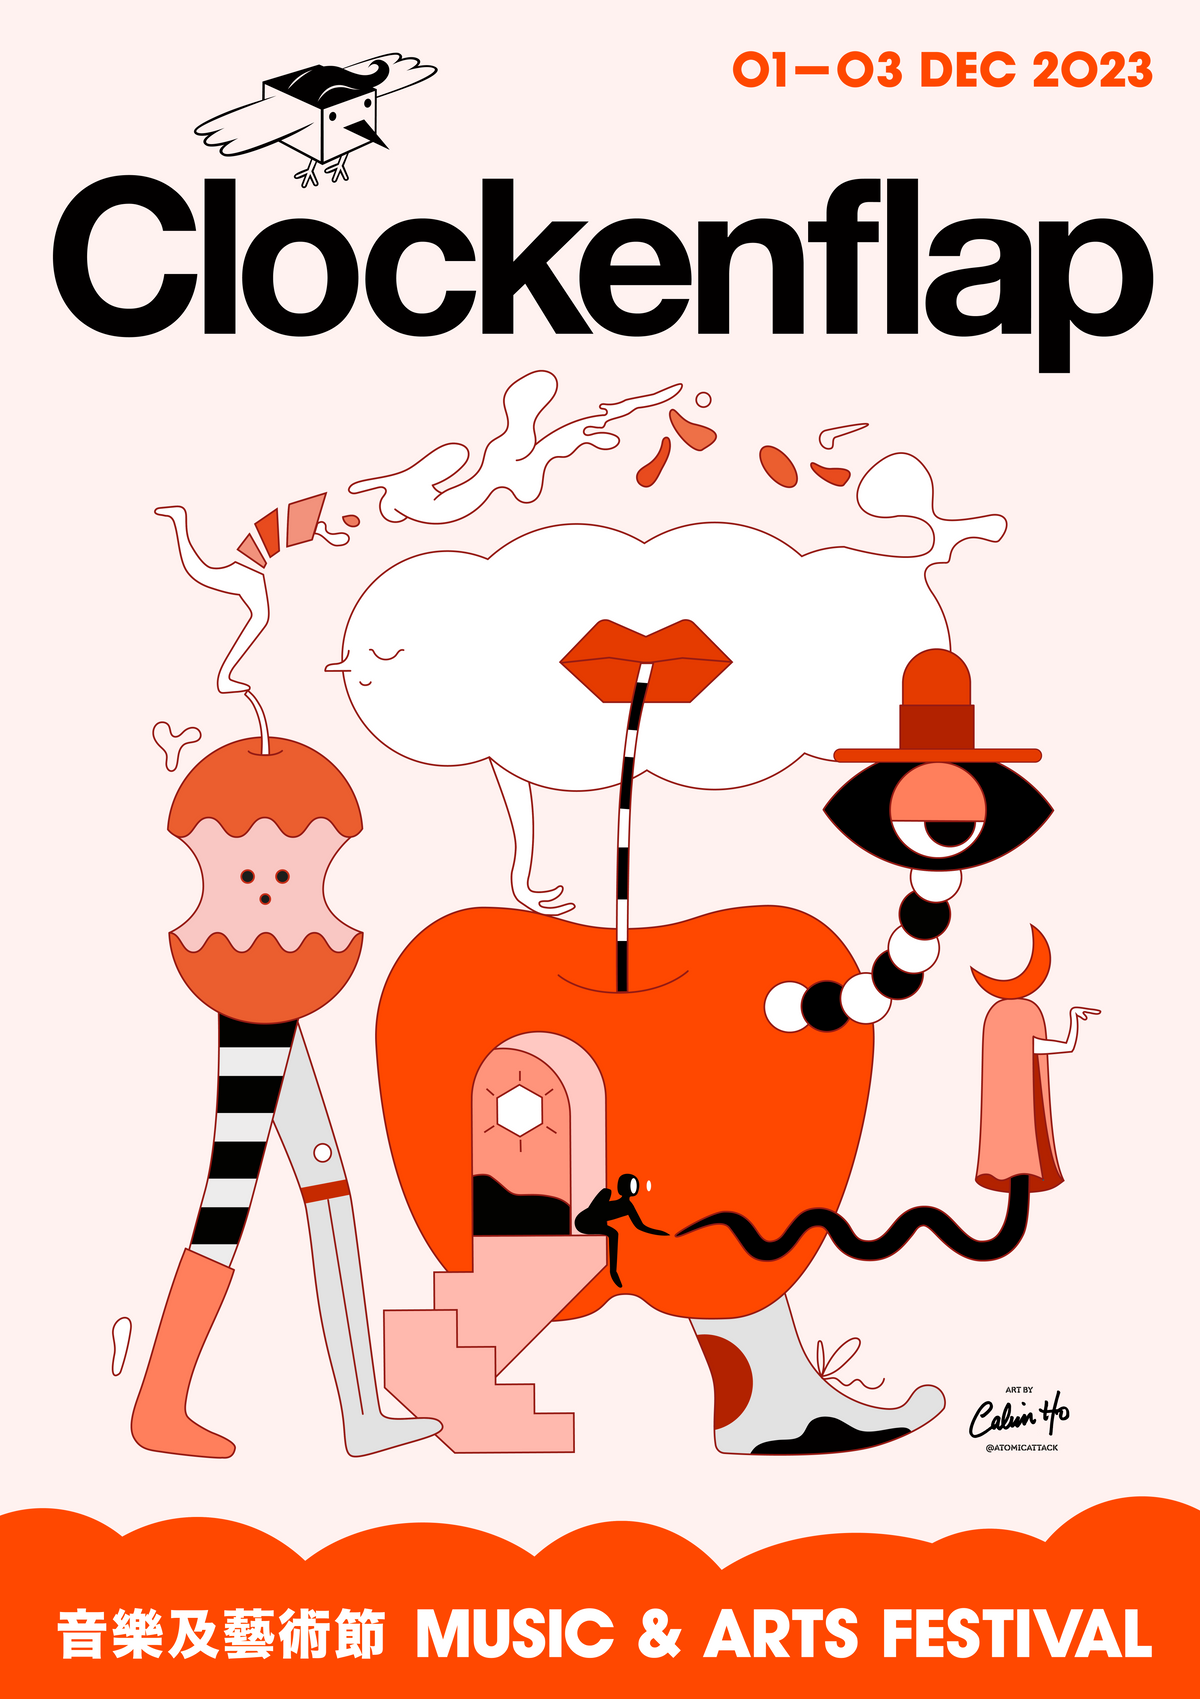 Clockenflap 2023 – Your guide for this year's festival